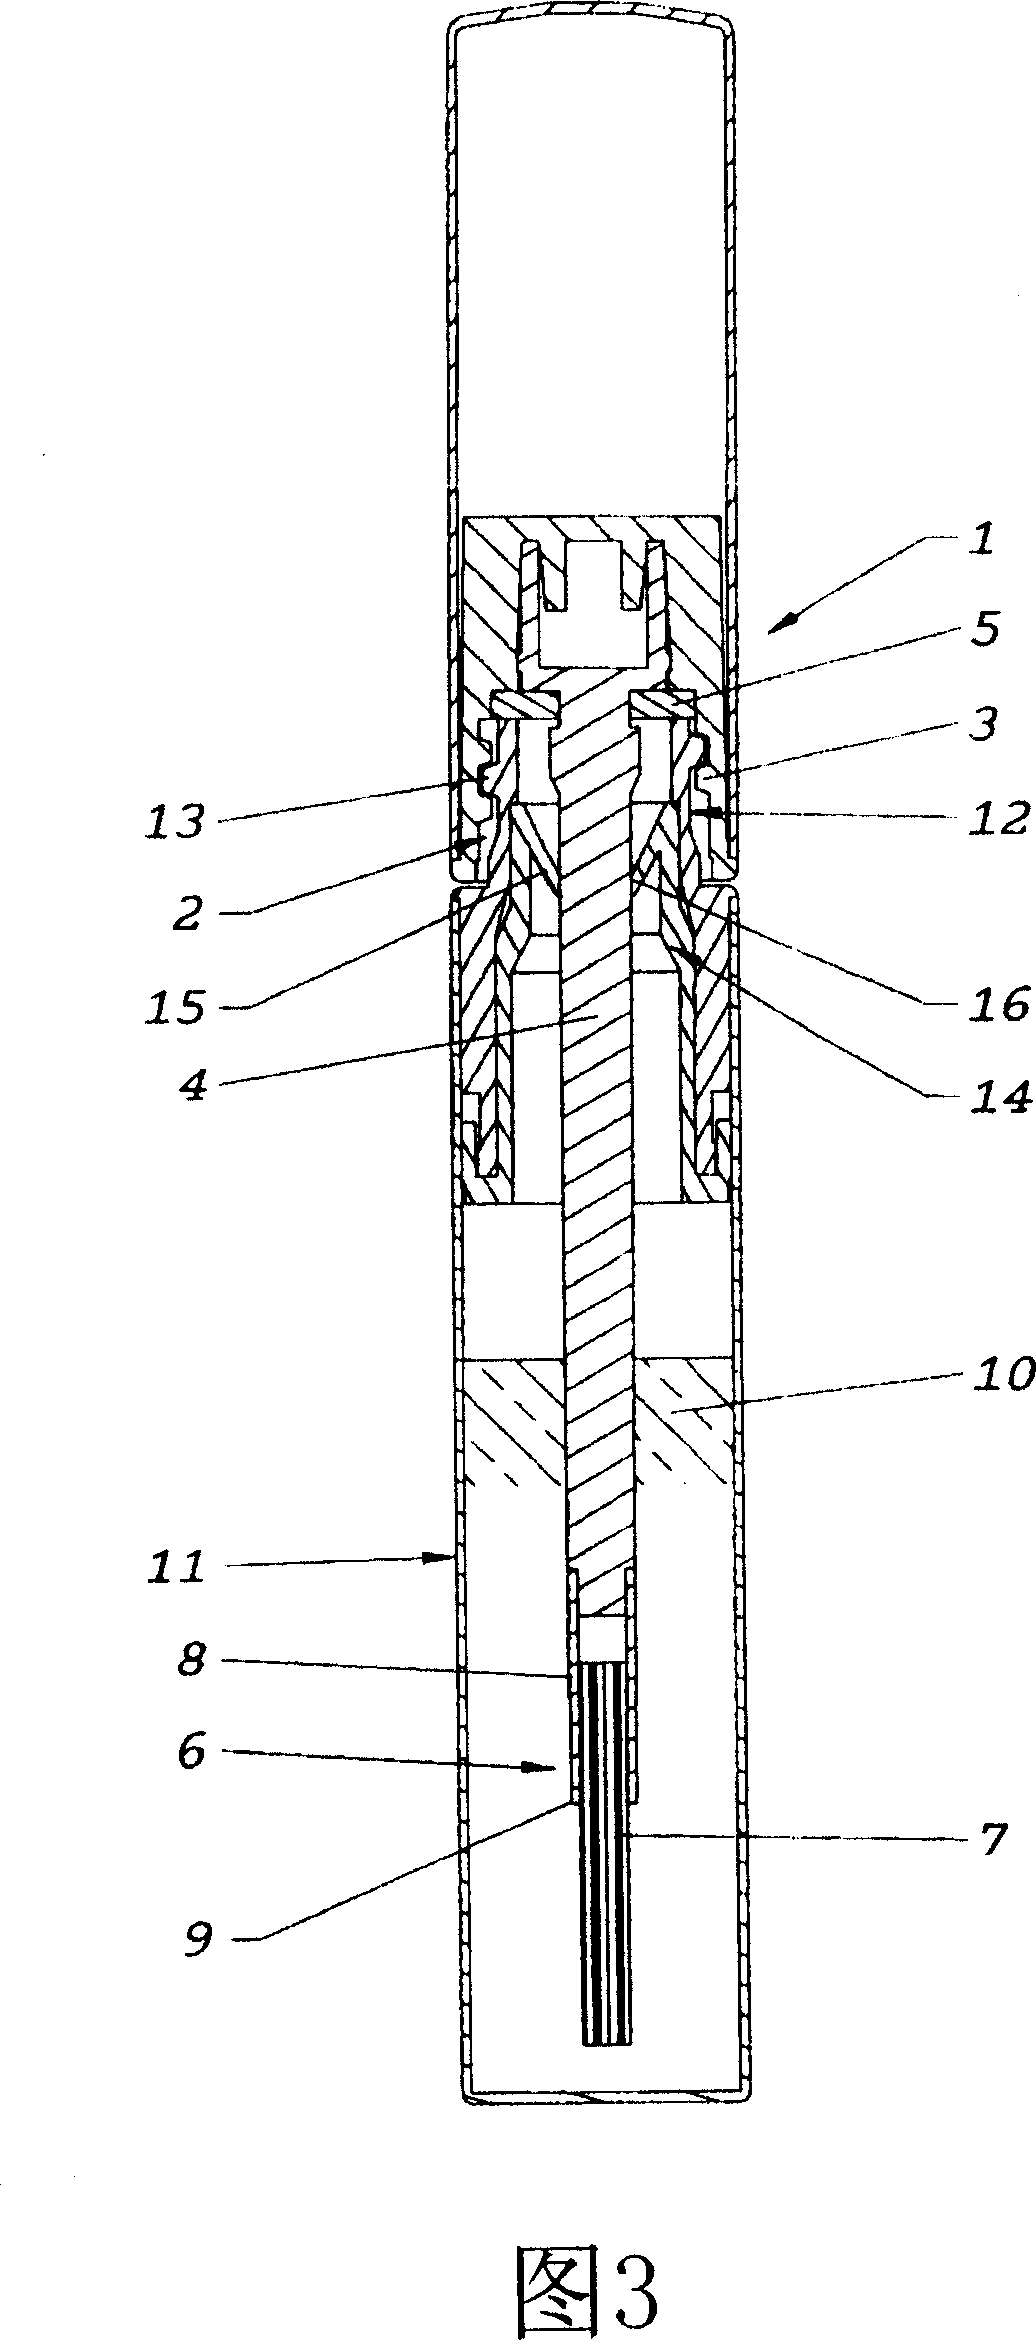 Applicator for cosmetic substances